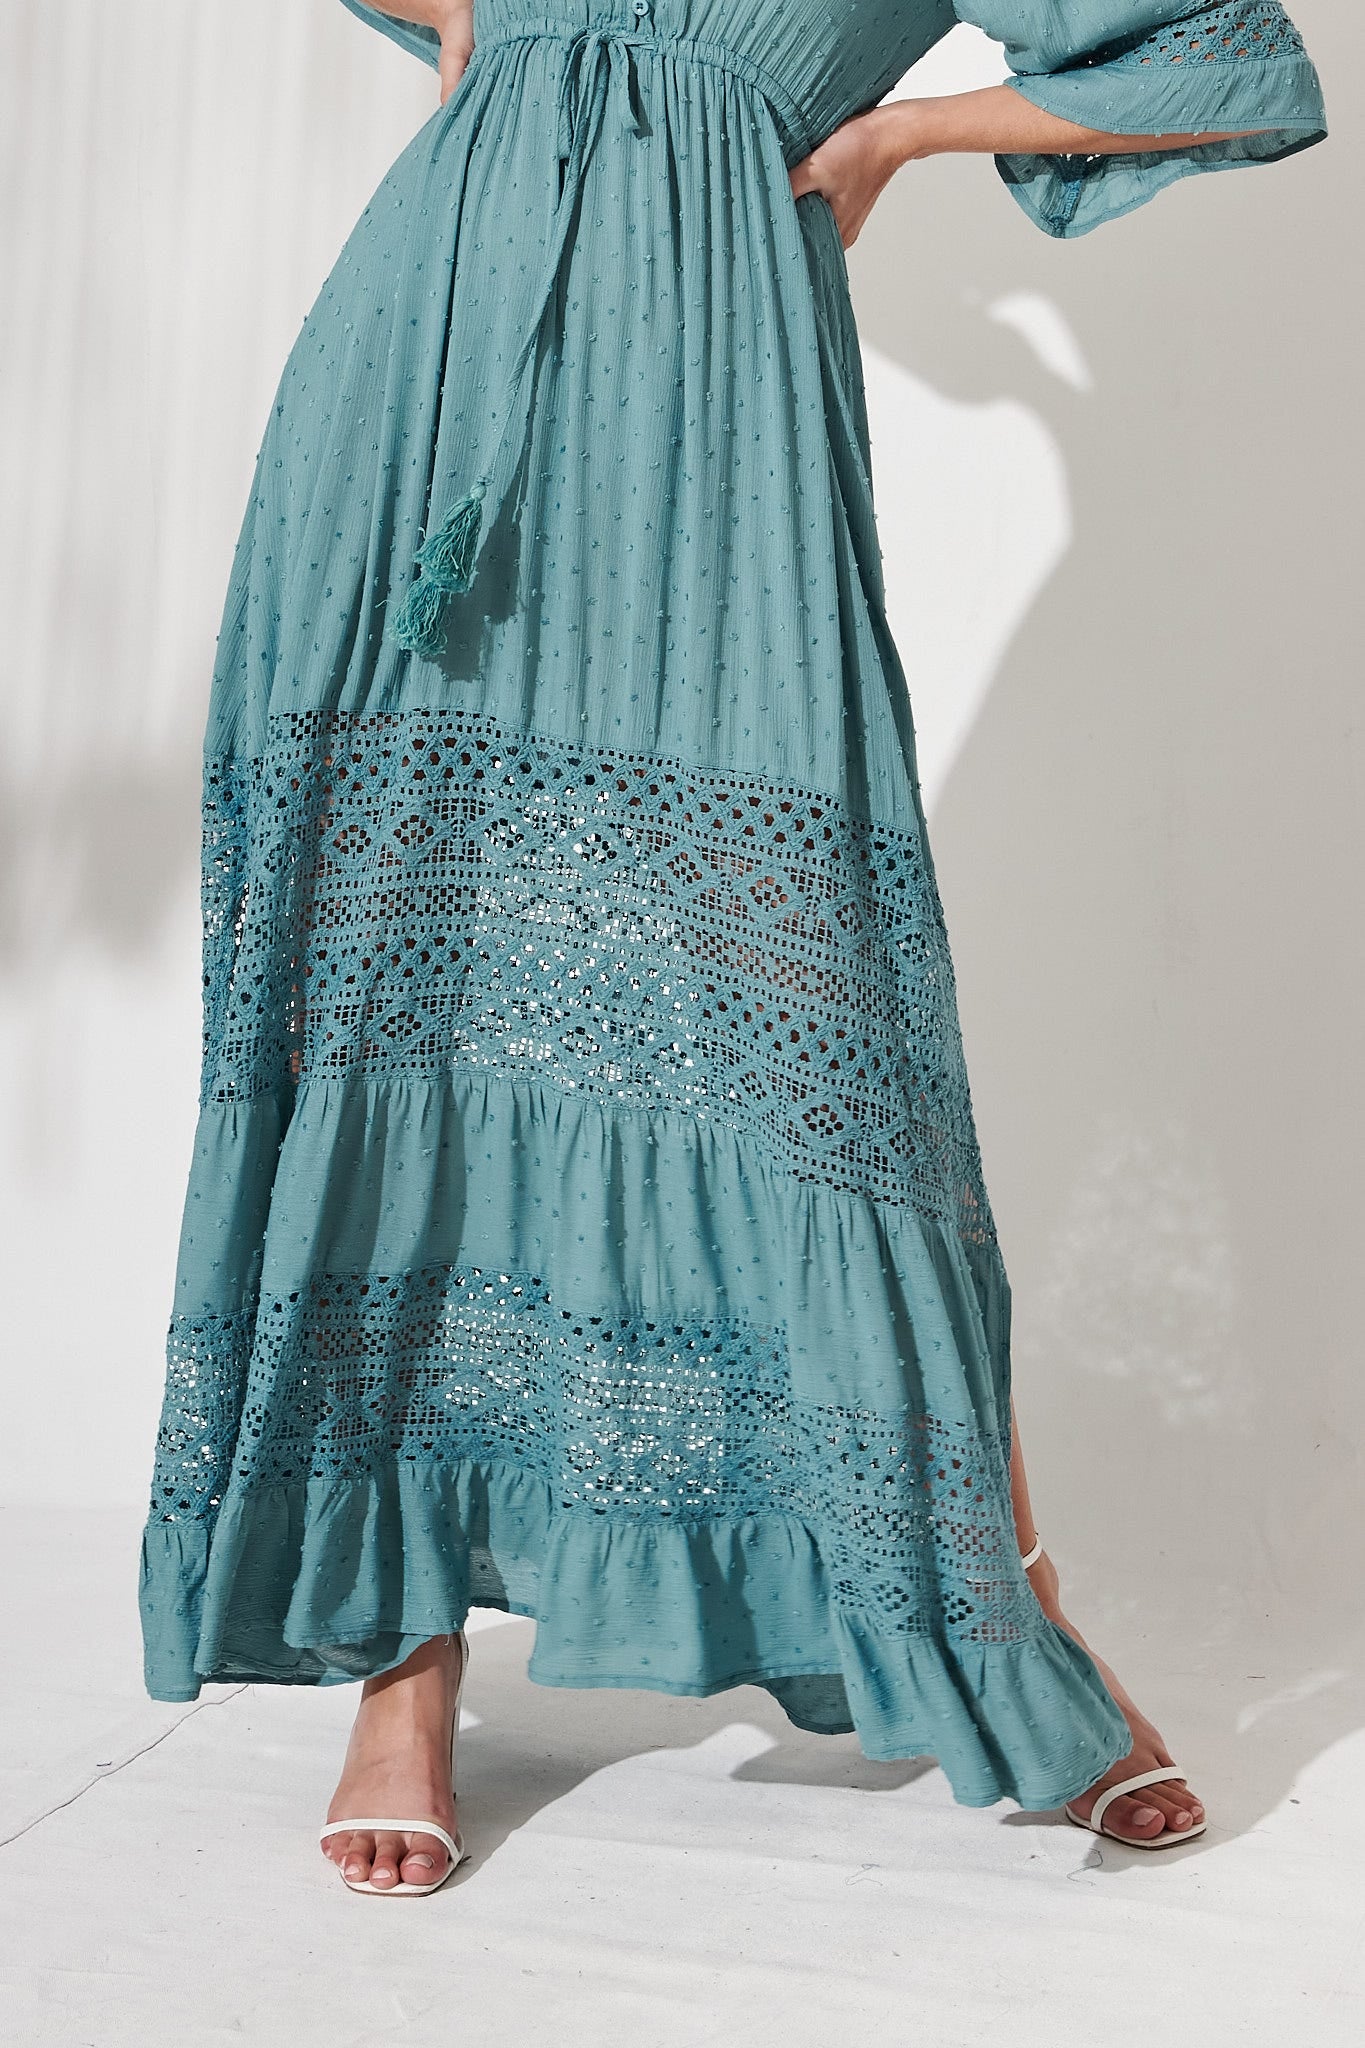 Boheme Dress in Dusty Teal with Lace Detail – St Frock